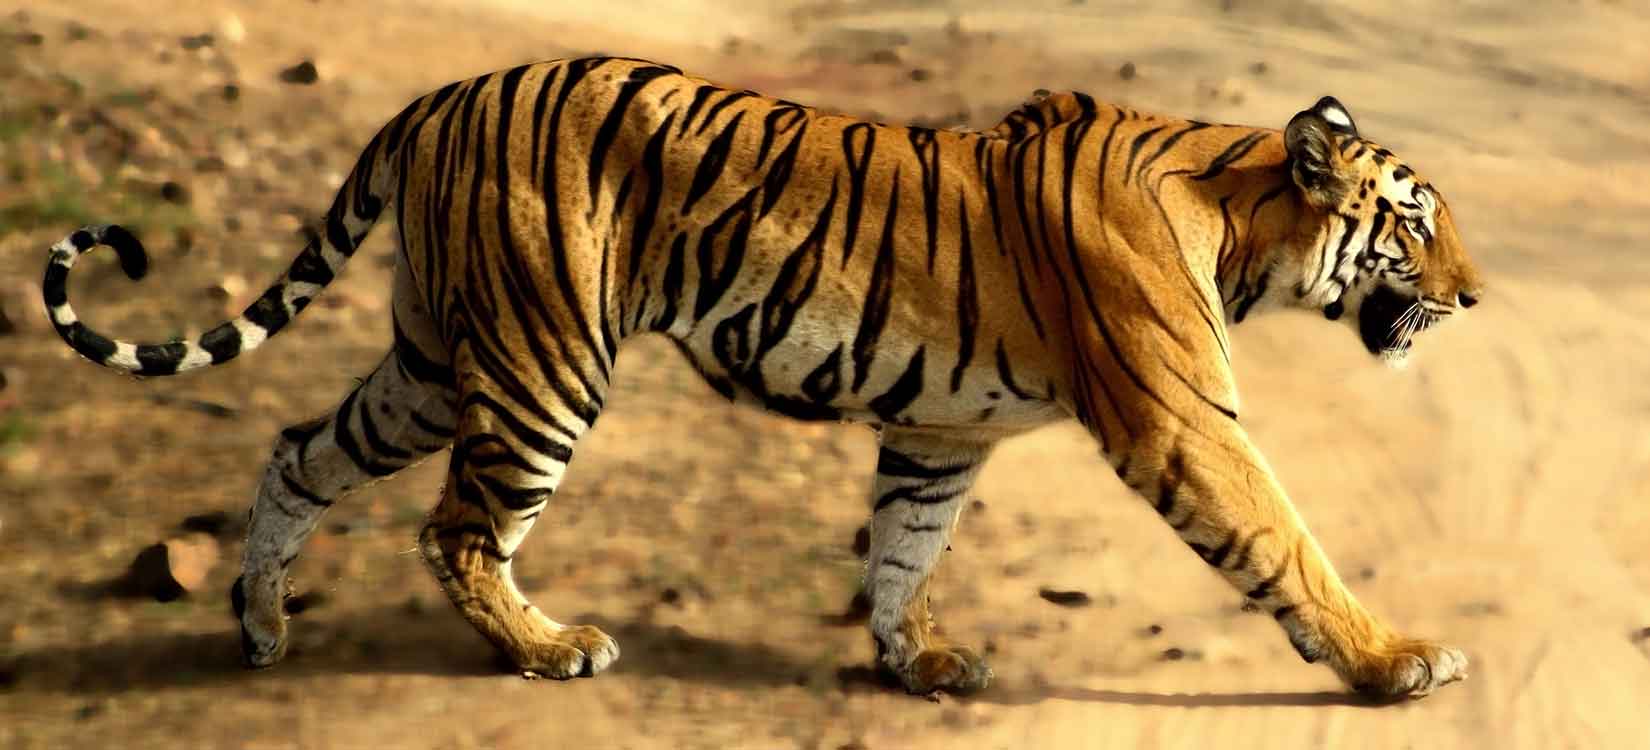 11 Days in The Tigers Goldmine|Tiger safaris & Tiger watching tours|  World's best responsible & ecotourism tiger safaris